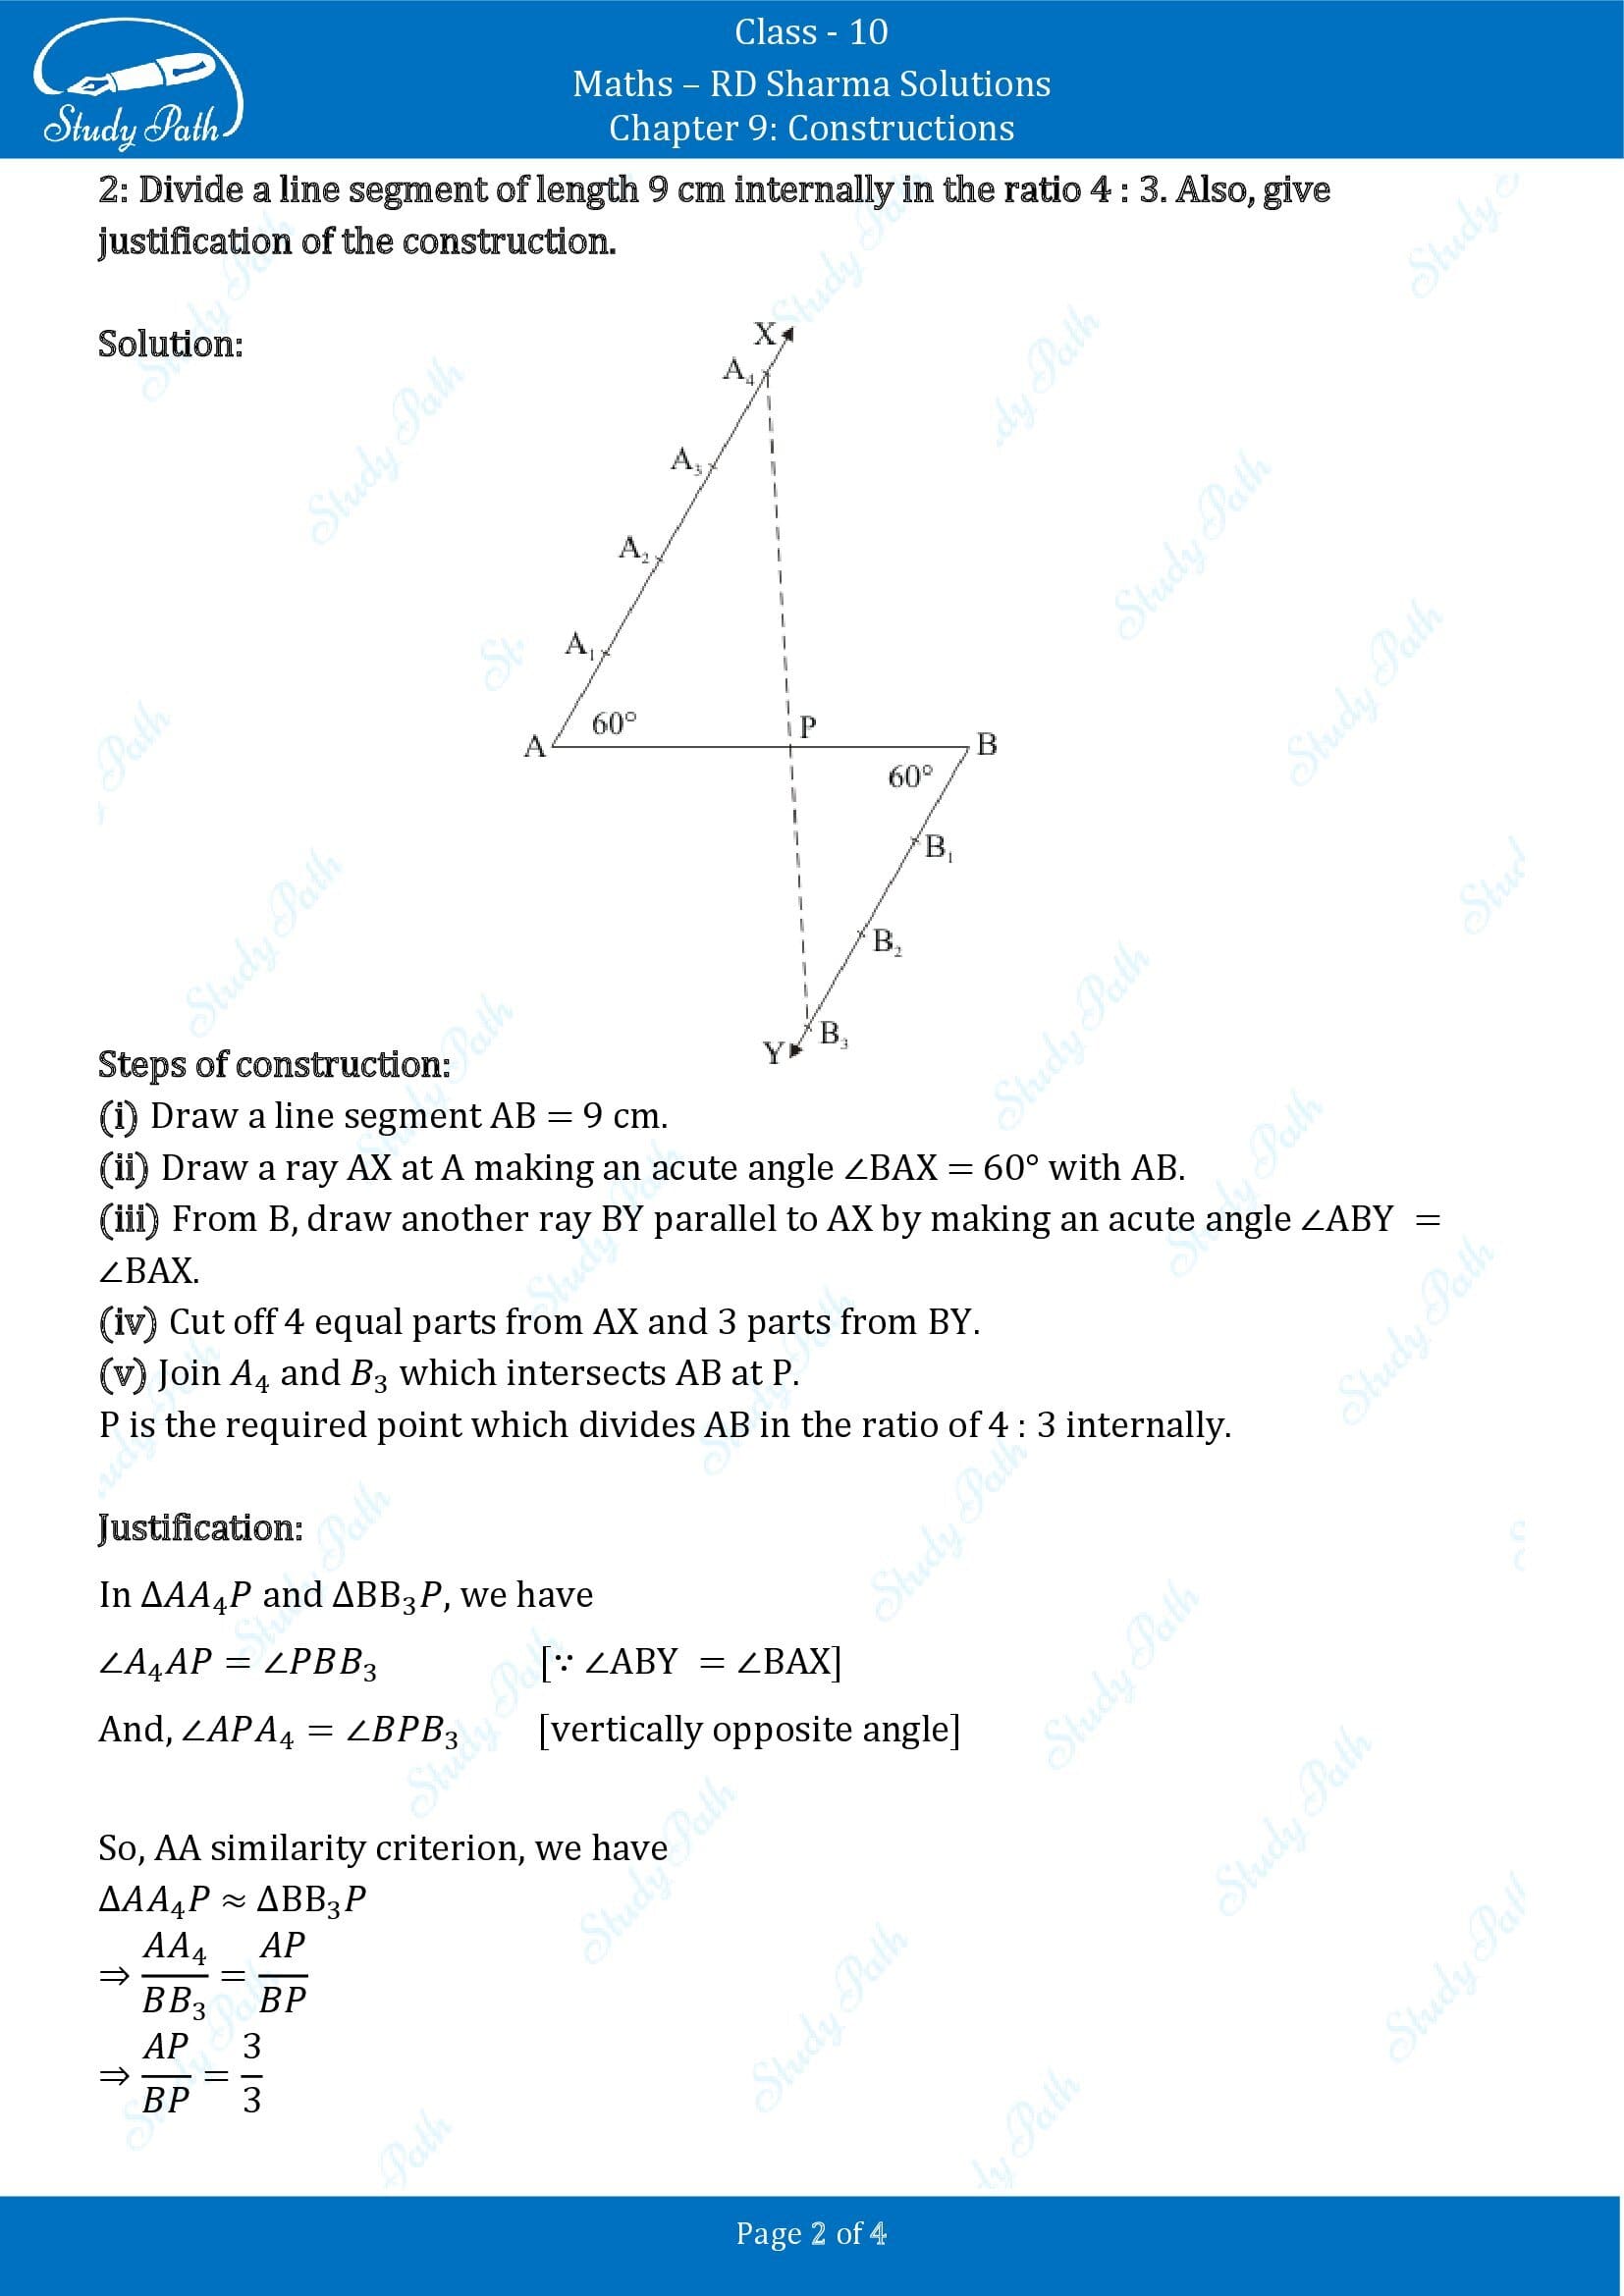 RD Sharma Solutions Class 10 Chapter 9 Constructions Exercise 9.1 00002